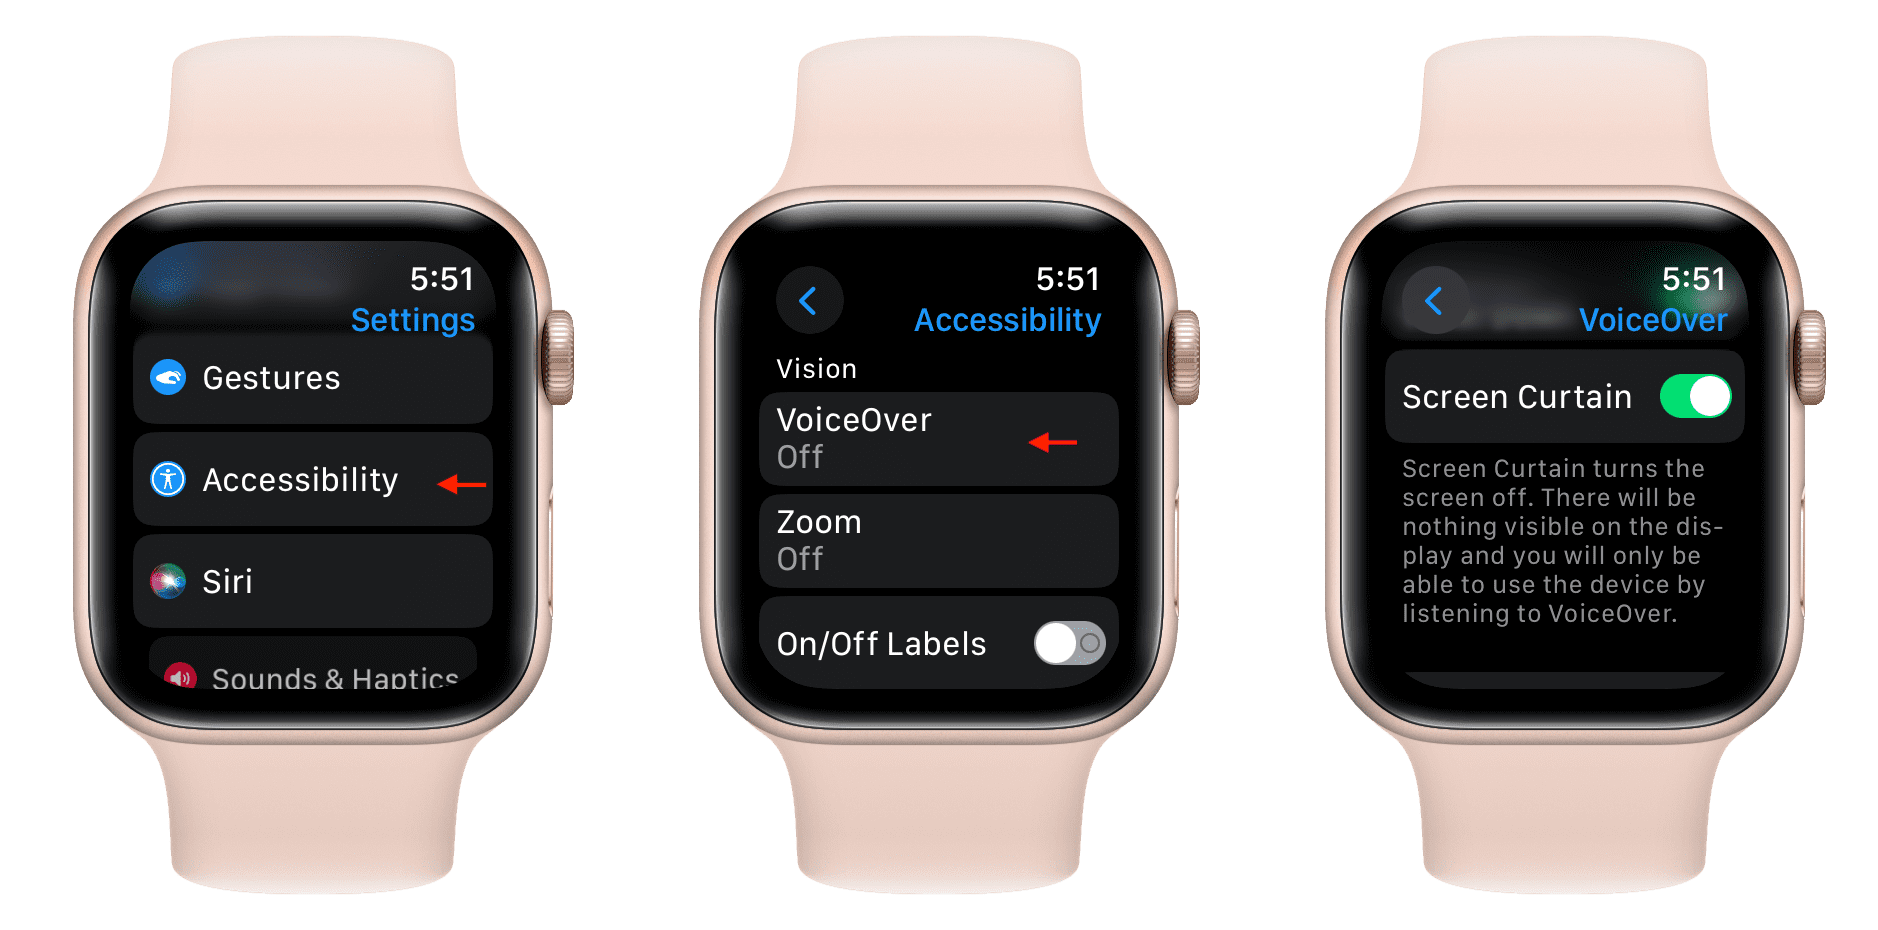 Screen Curtain in VoiceOver settings on Apple Watch